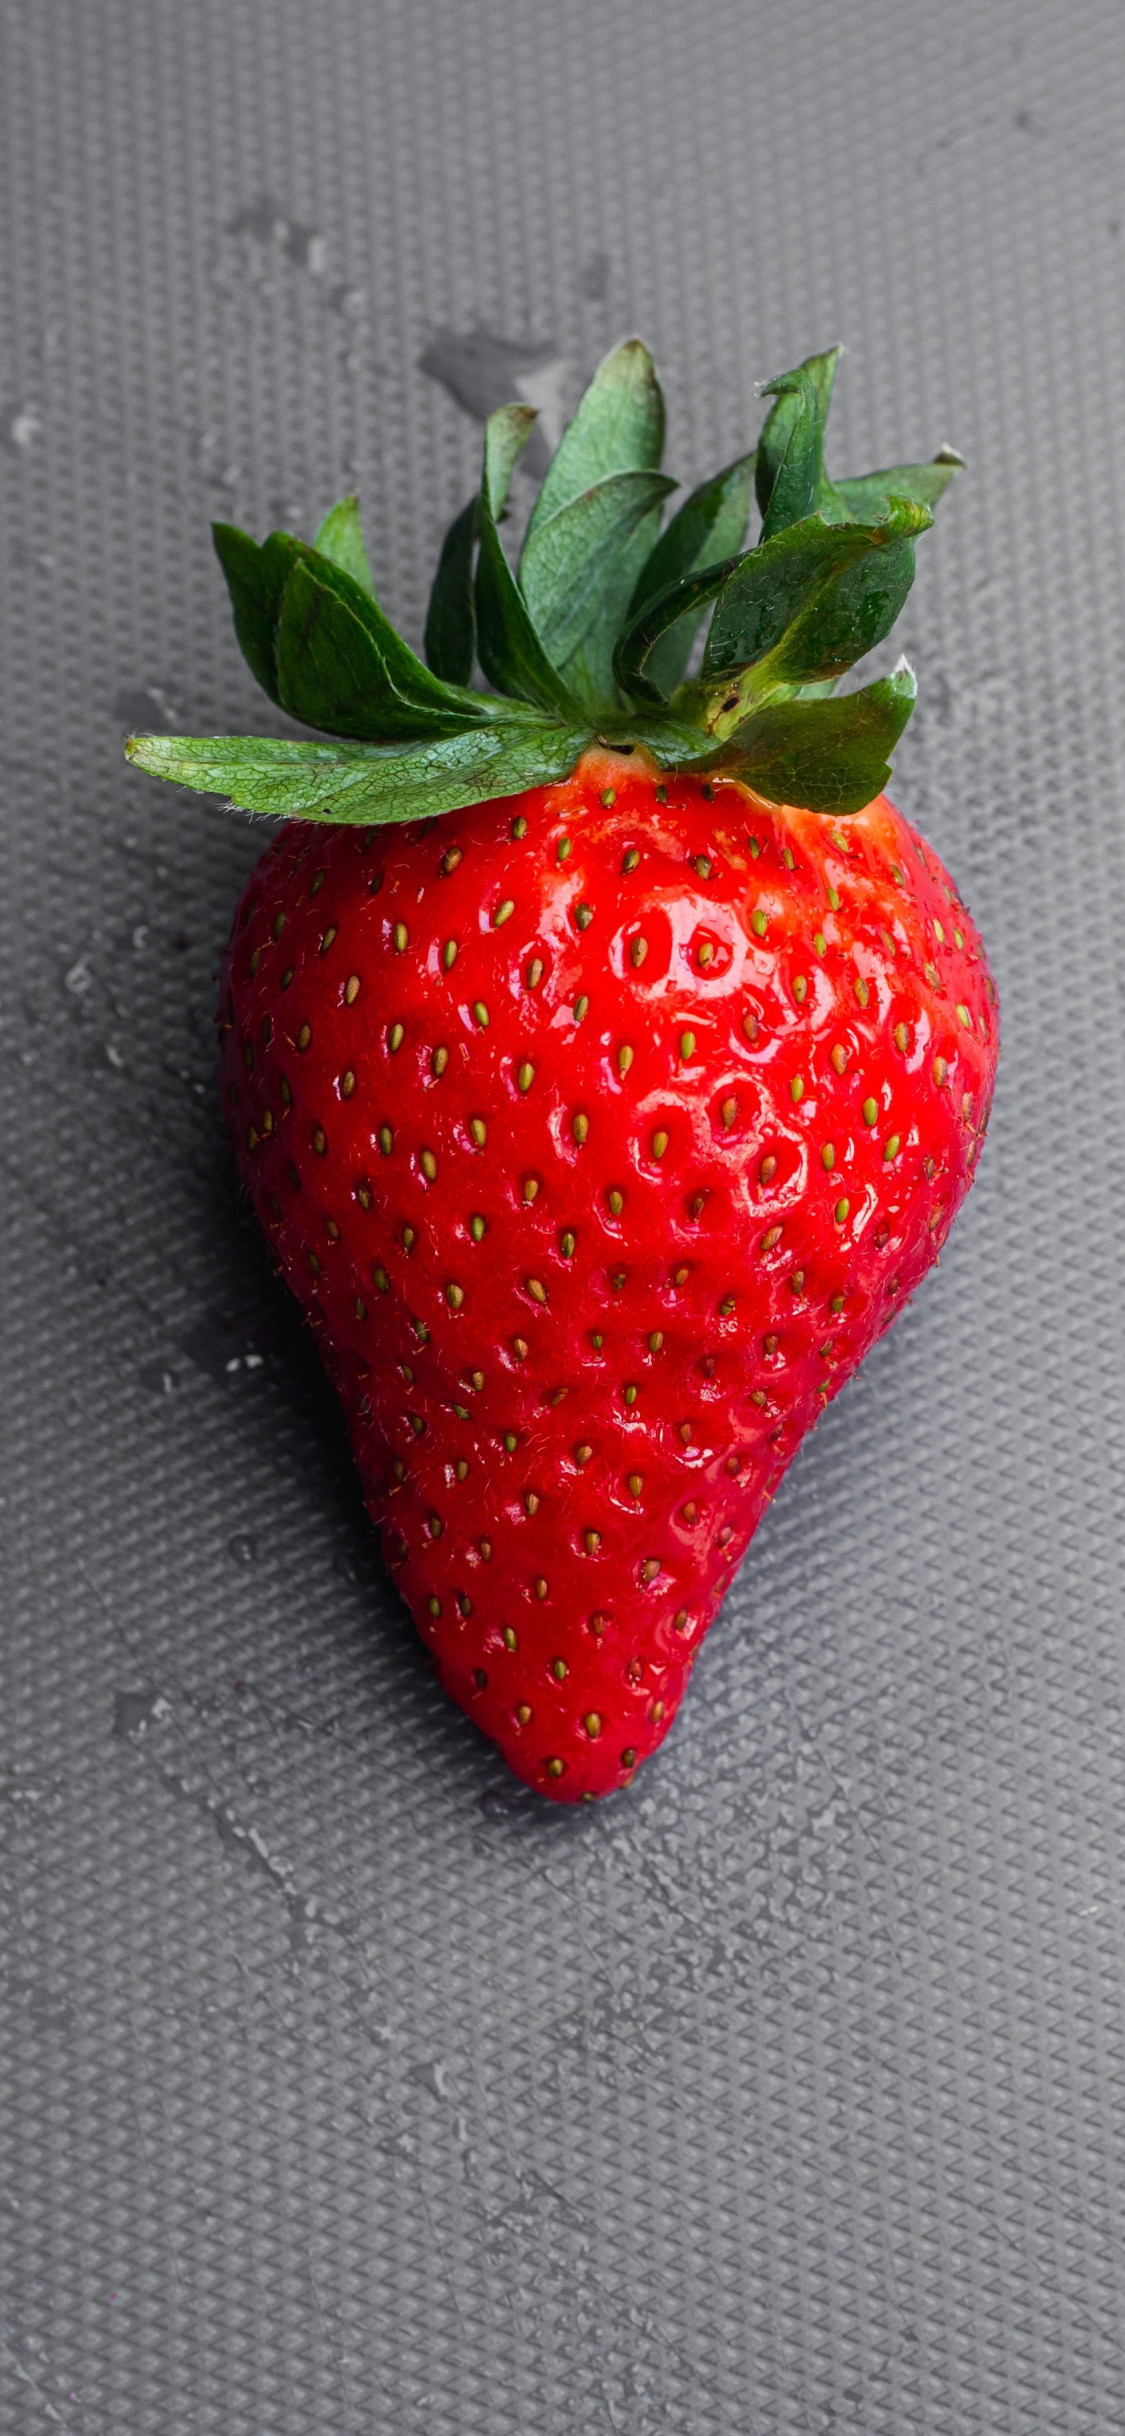 Strawberry: Belong to the group of fruit that produce miniature seeds known as achenes. 1130x2440 HD Wallpaper.